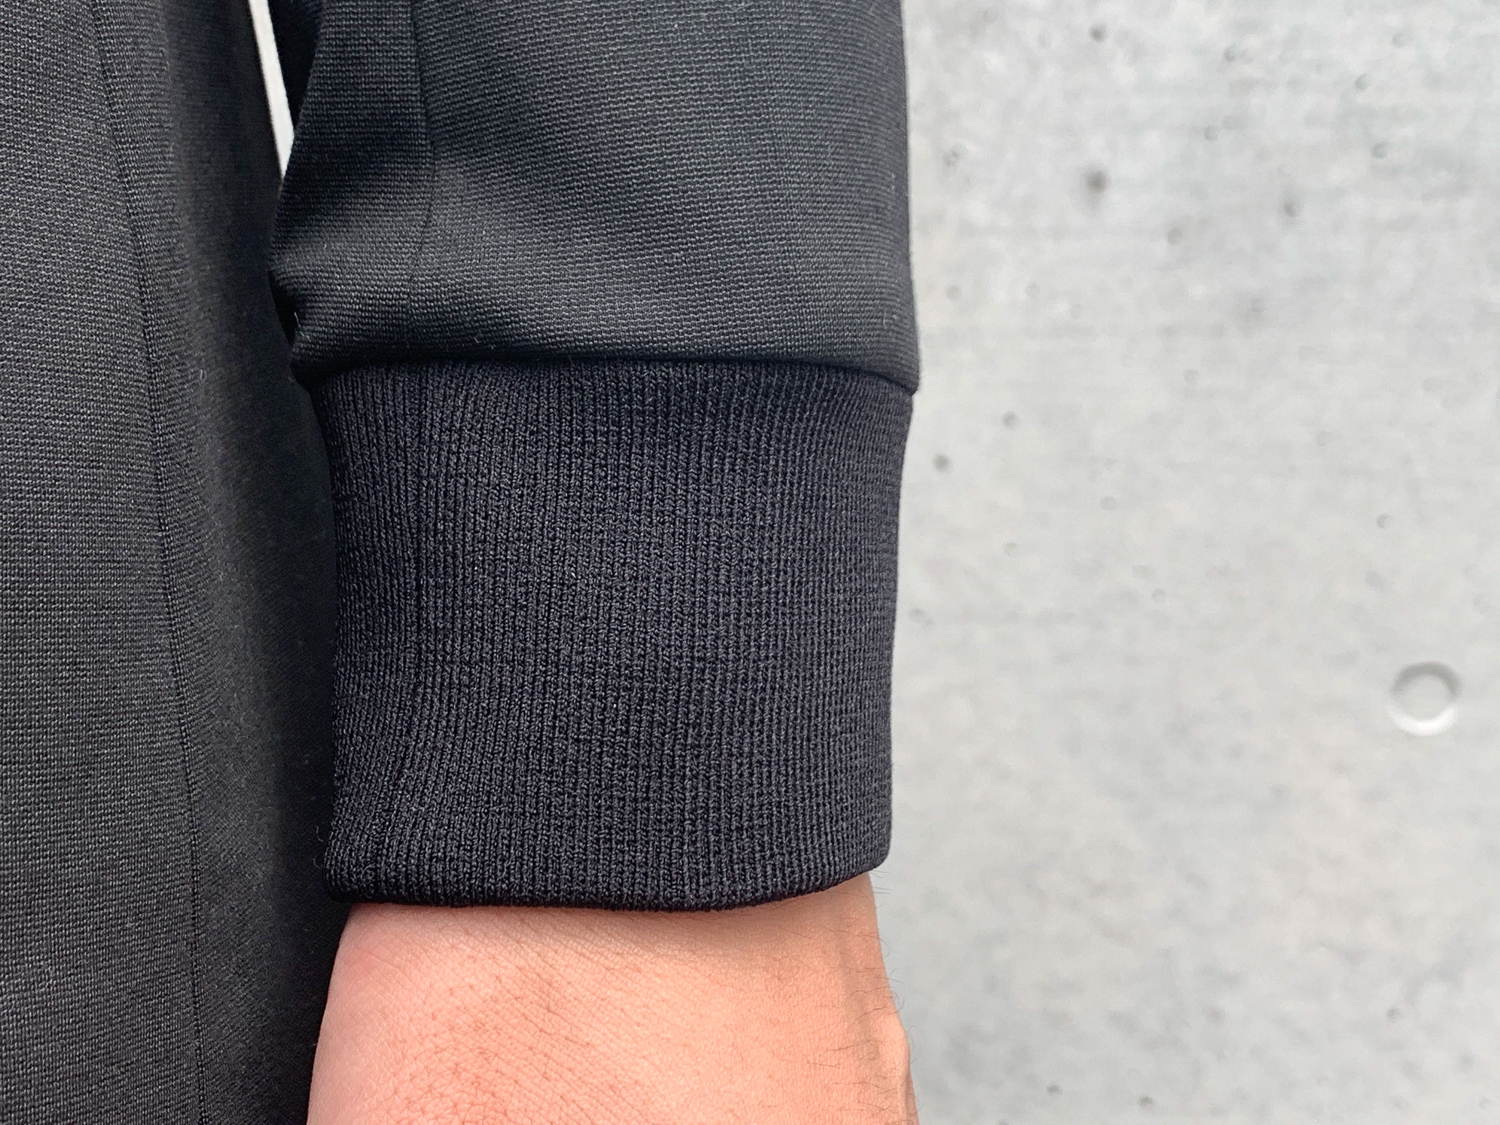 A black cuff that compliments an all black suit.